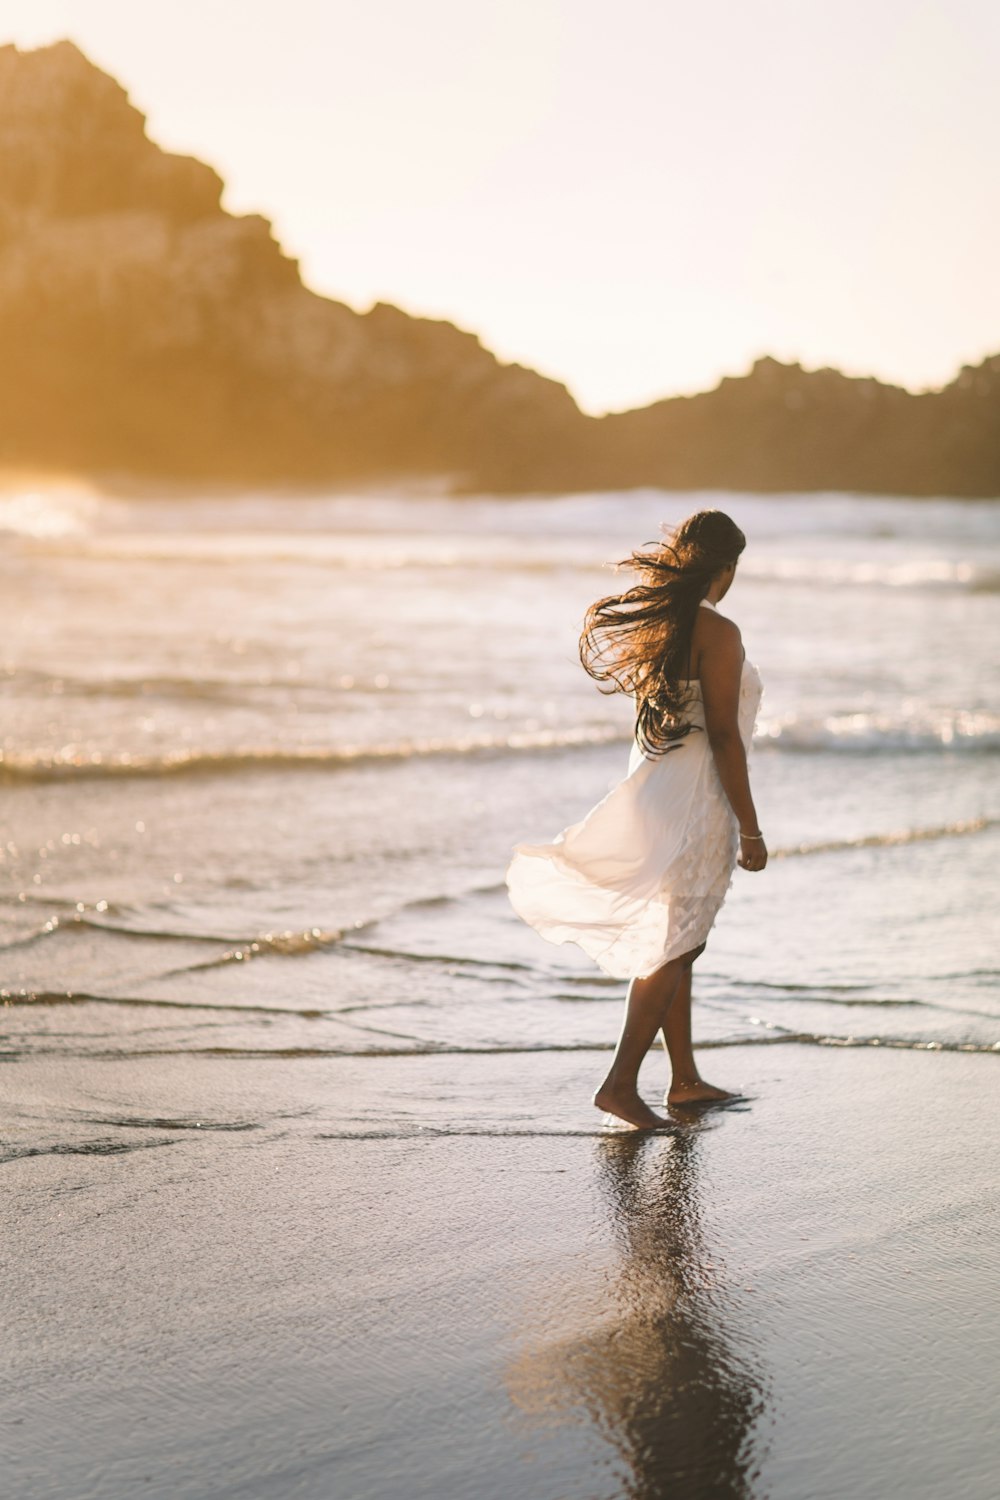 selective focus photo of woman standing on sea shore near rock formation during golden hour